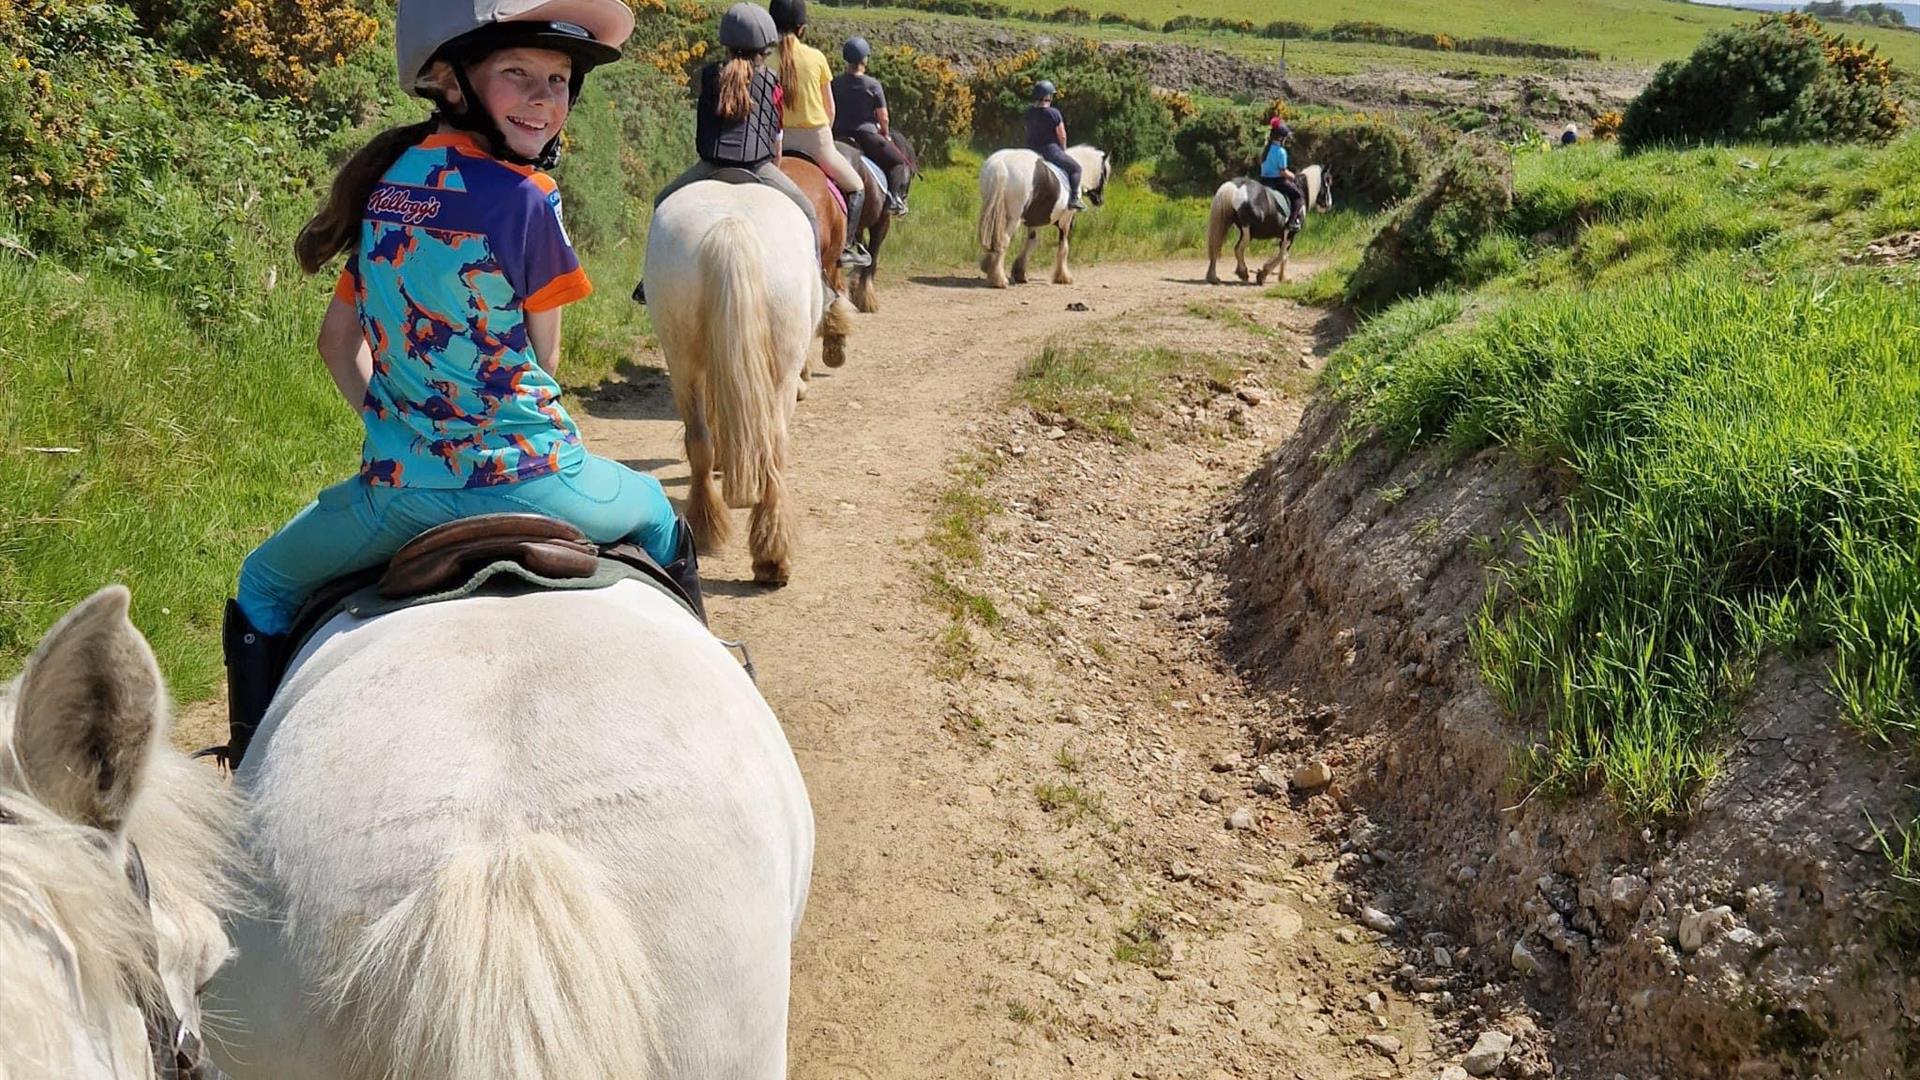 a group of children and adults are riding on horseback through the countryside